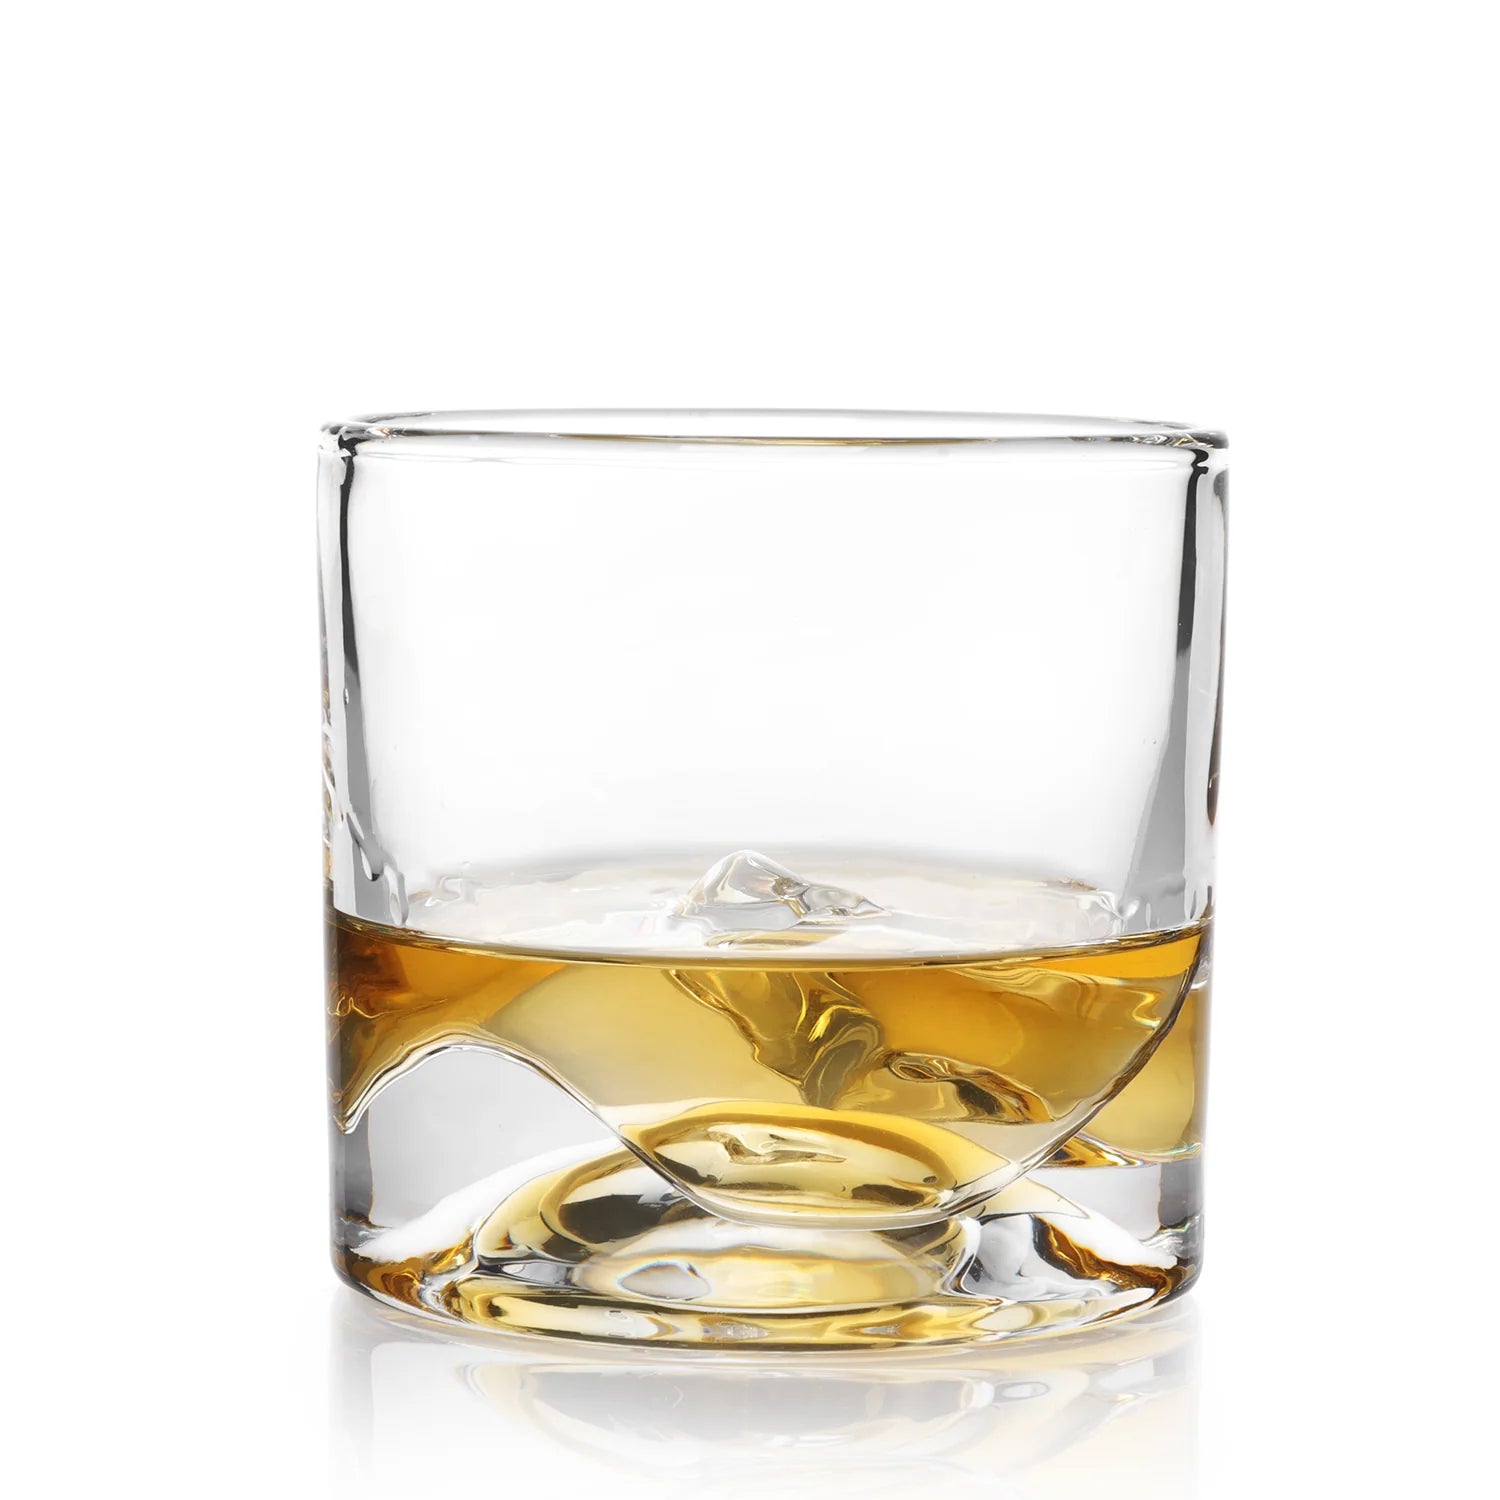 Grand Canyon Whiskey Glass // Set of 4 - Liiton PERMANENT STORE - Touch of  Modern